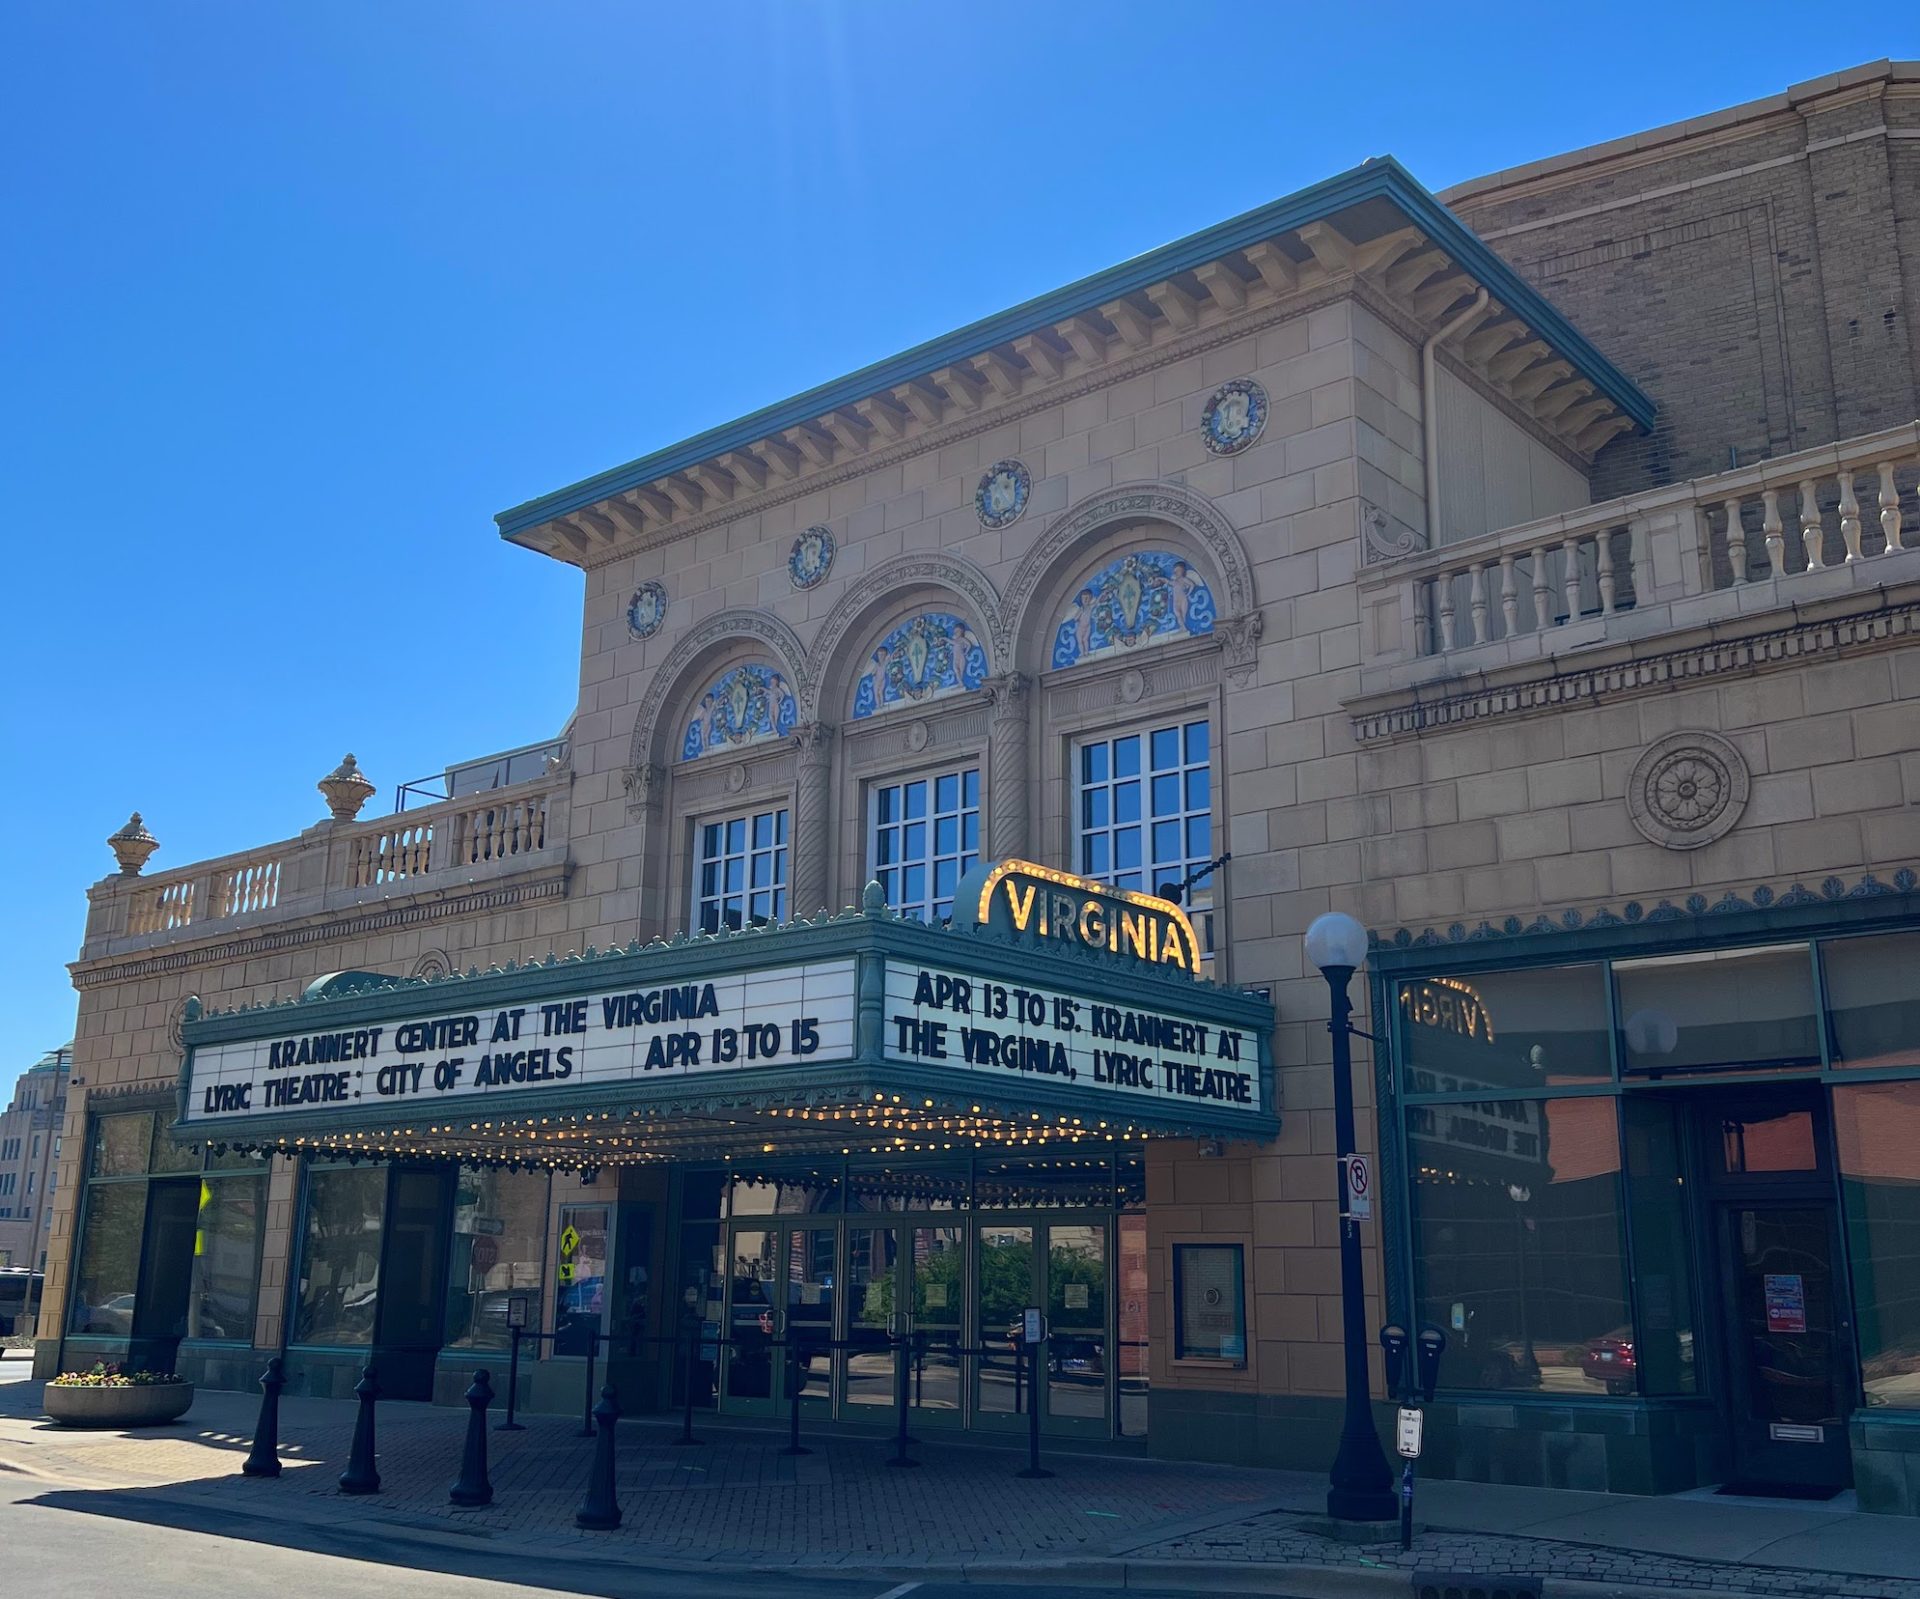 Exterior of the Virginia Theatre against a bright blue sky. The marquee reads "Krannert Center at the Virginia"